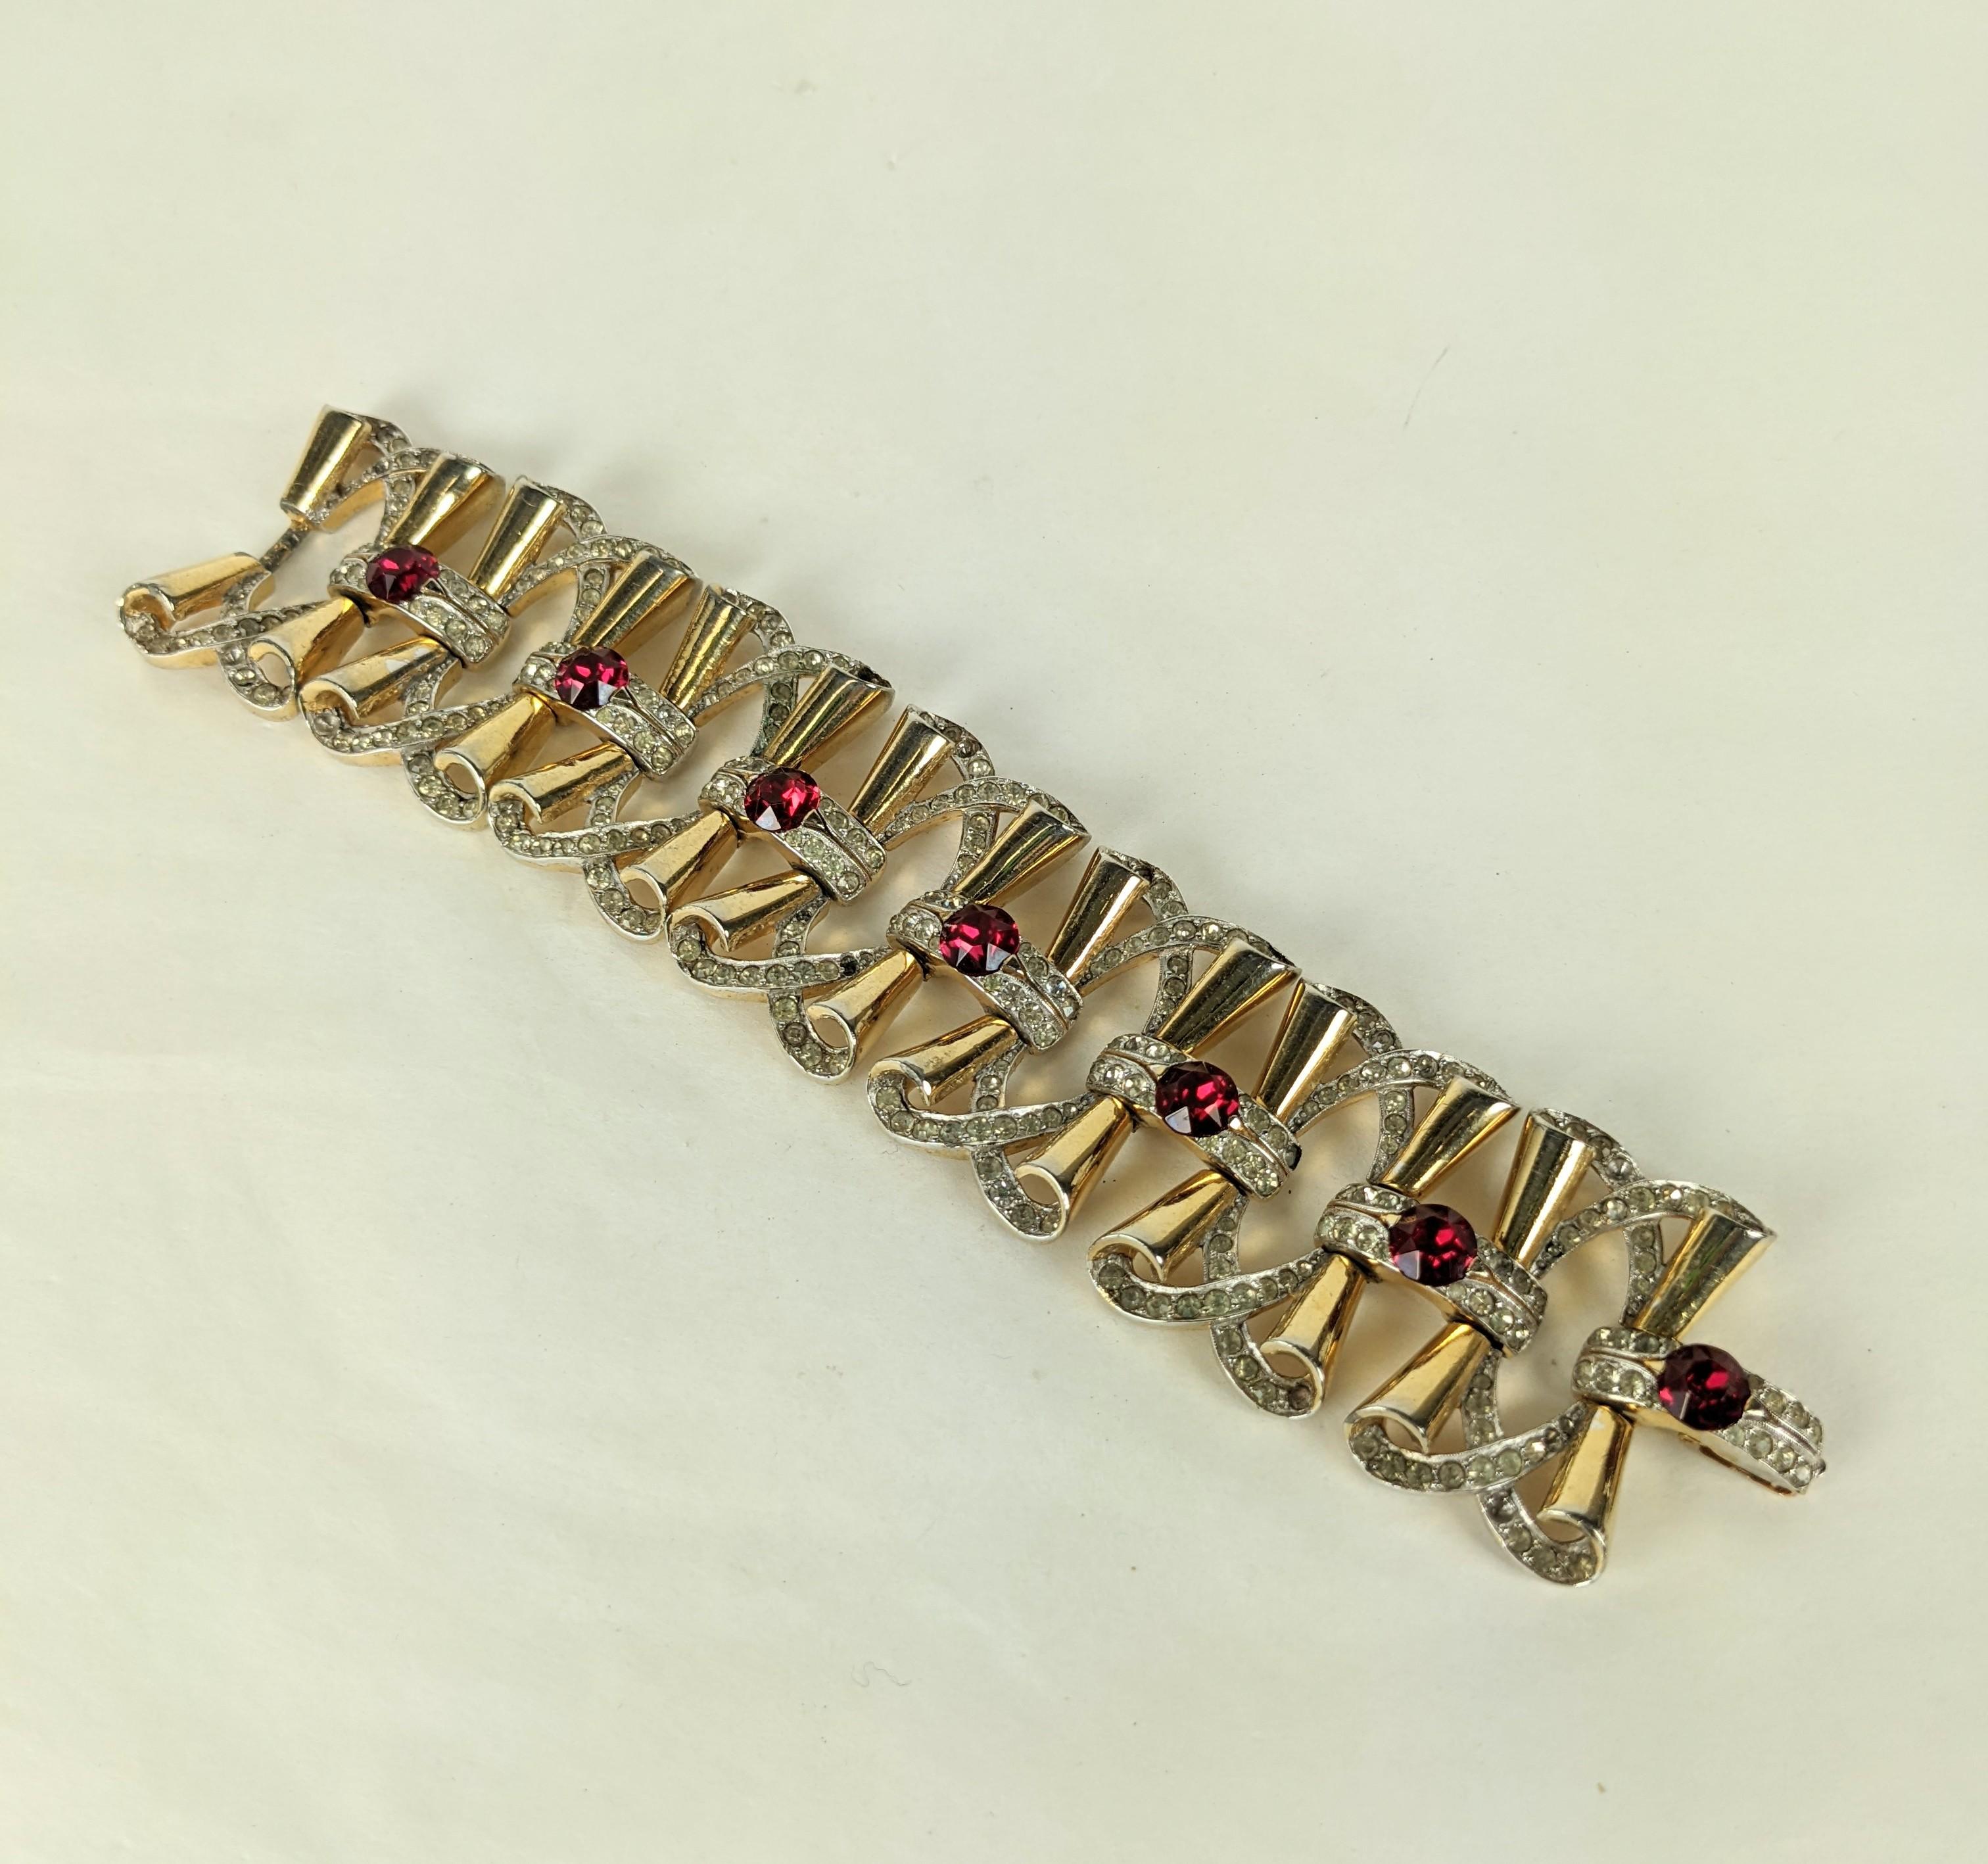 Mazer wide Retro link bracelet. Of rhodium plate base metal and yellow gold plate. Composed of overlapping linked retro bows with crystal pave rhinestone accents and large focal faux rubies.
Excellent Condition, Signed. Matching necklace available.